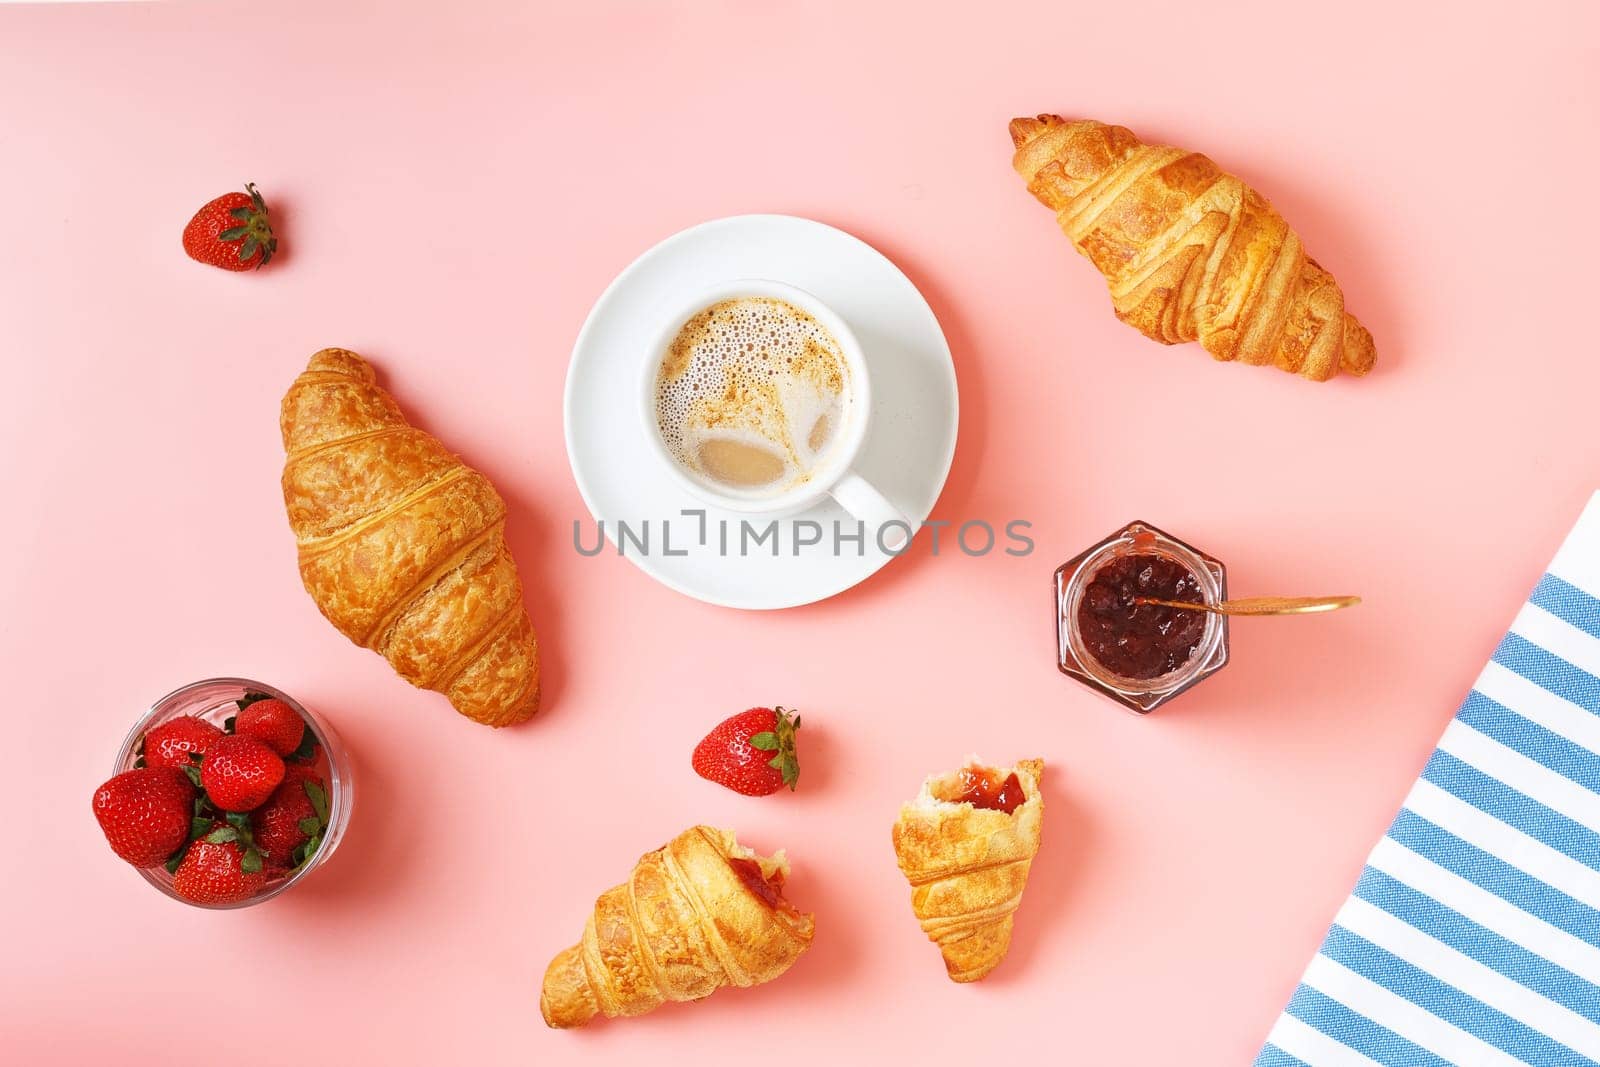 Delicious breakfast with fresh croissants, coffee, berry jam and fresh berries on a pink background.